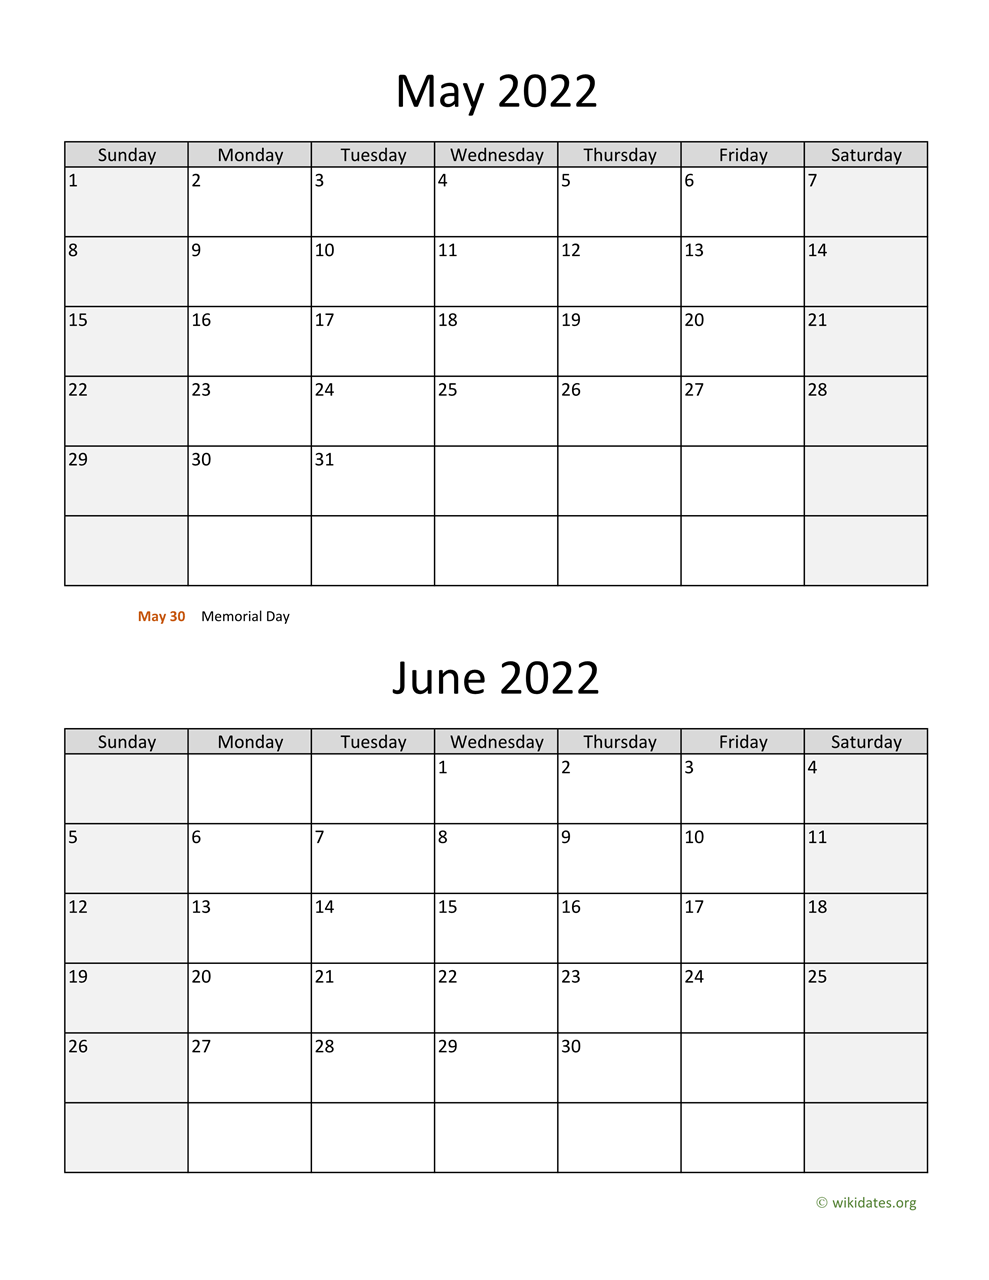 May And June 2022 Calendar Wikidates Org